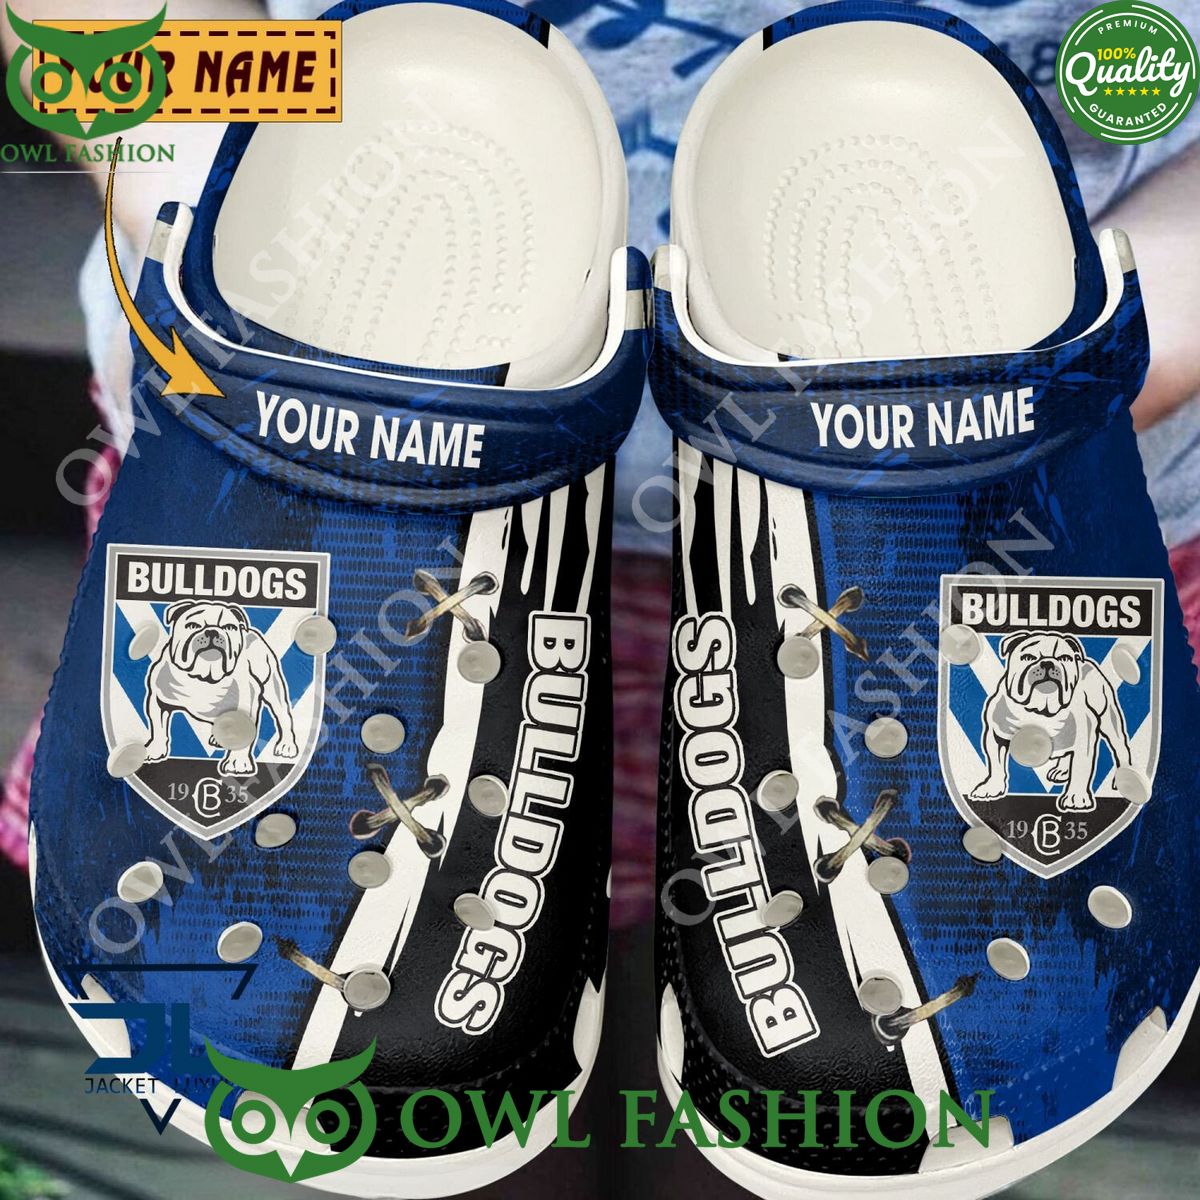 Canterbury Bankstown Bulldogs Personalized Rugby League Crocs